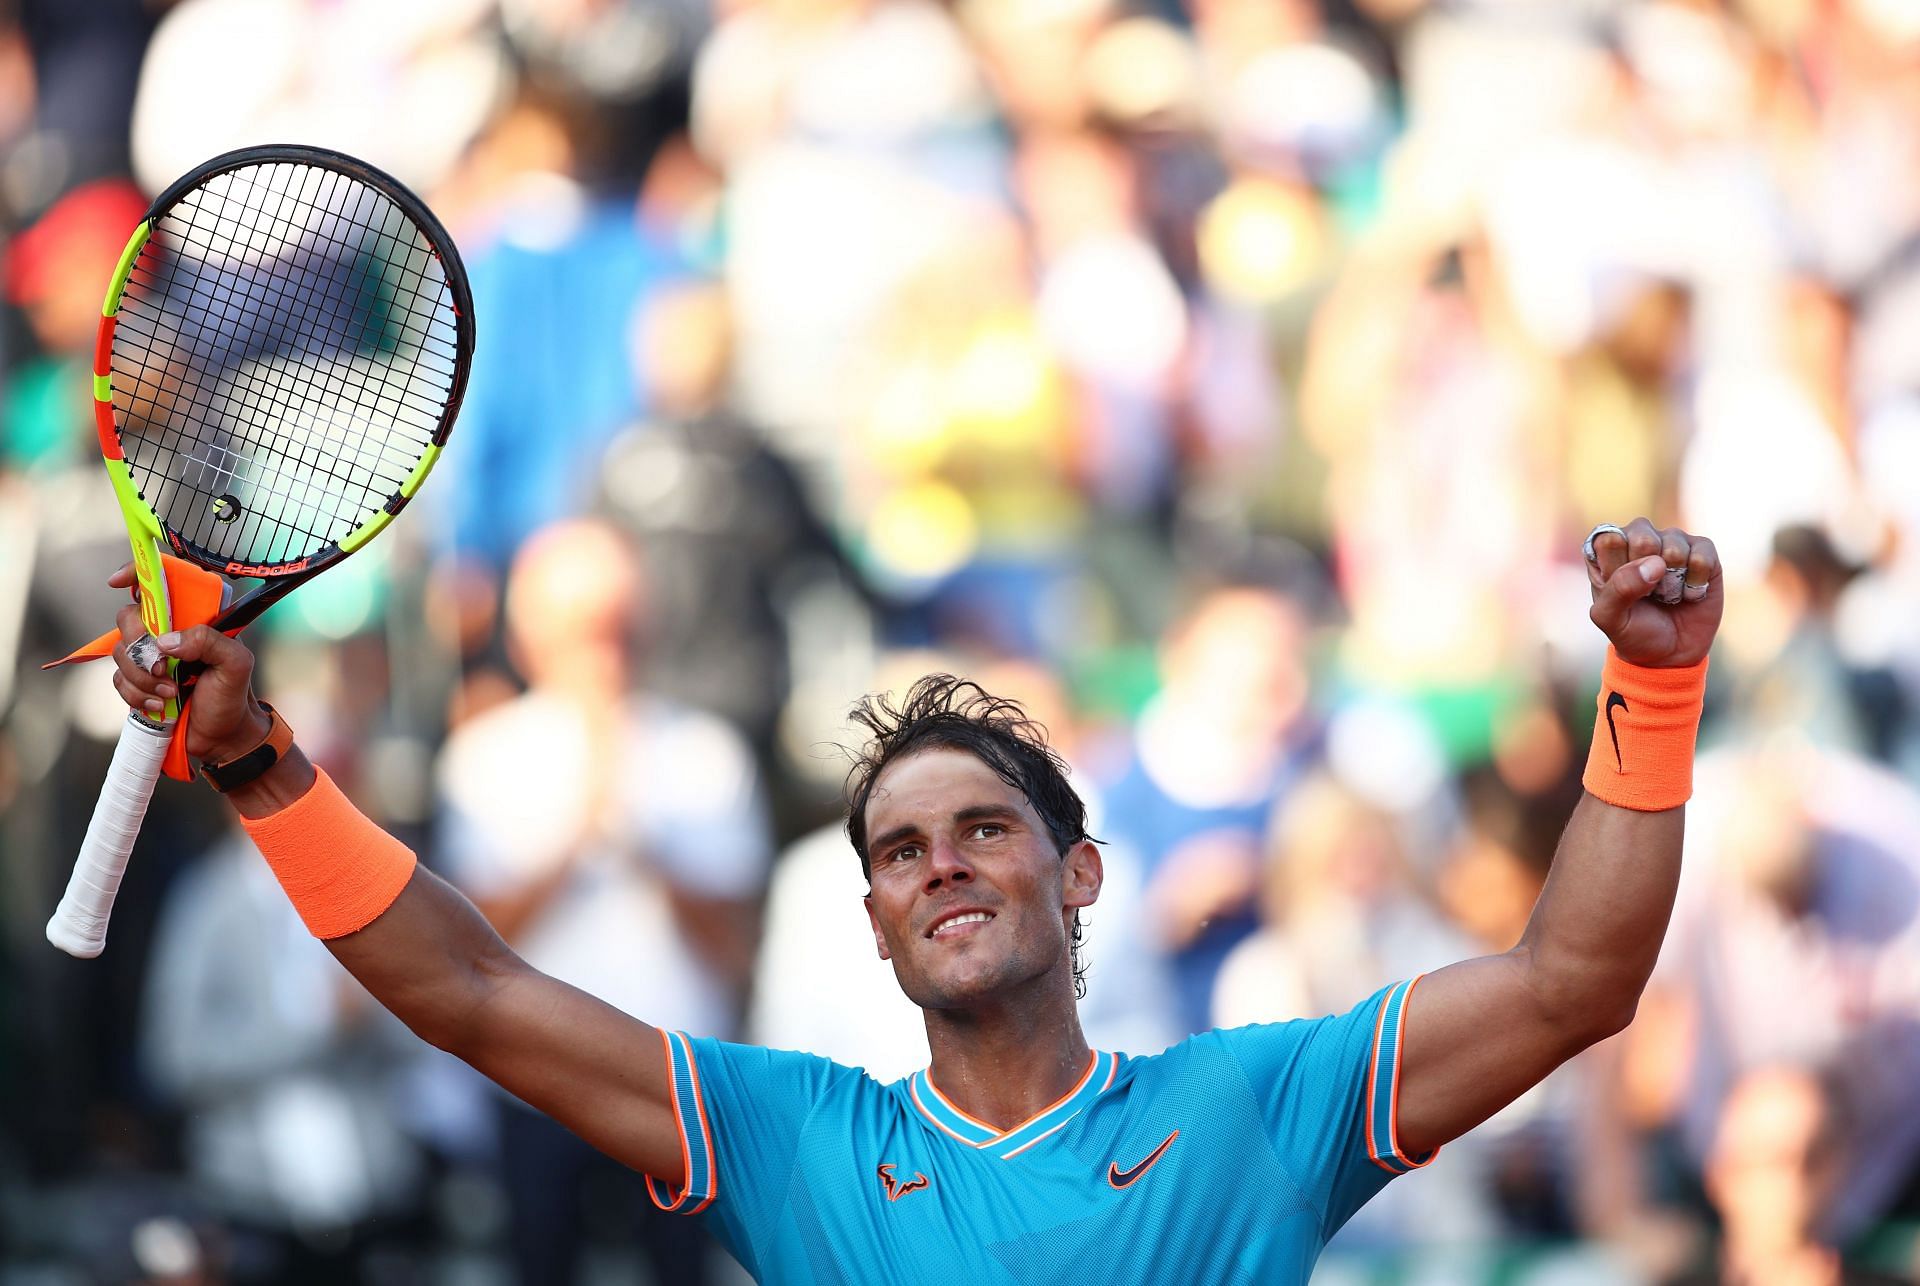 The Spaniard has a staggering record at Monte Carlo, winning the tournament 11 times